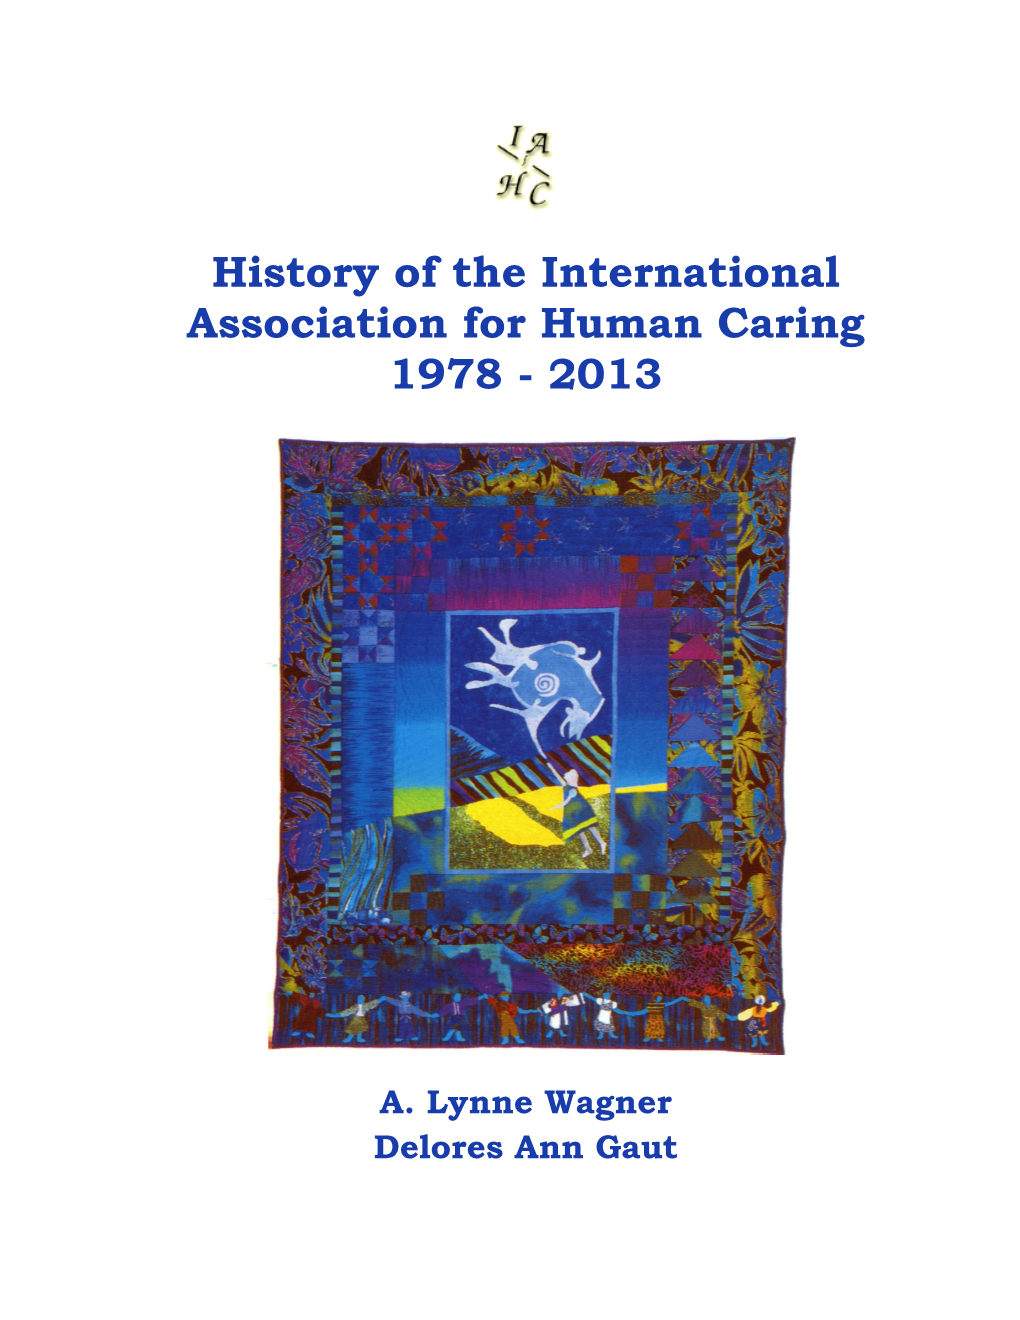 History of the International Association for Human Caring 1978 - 2013